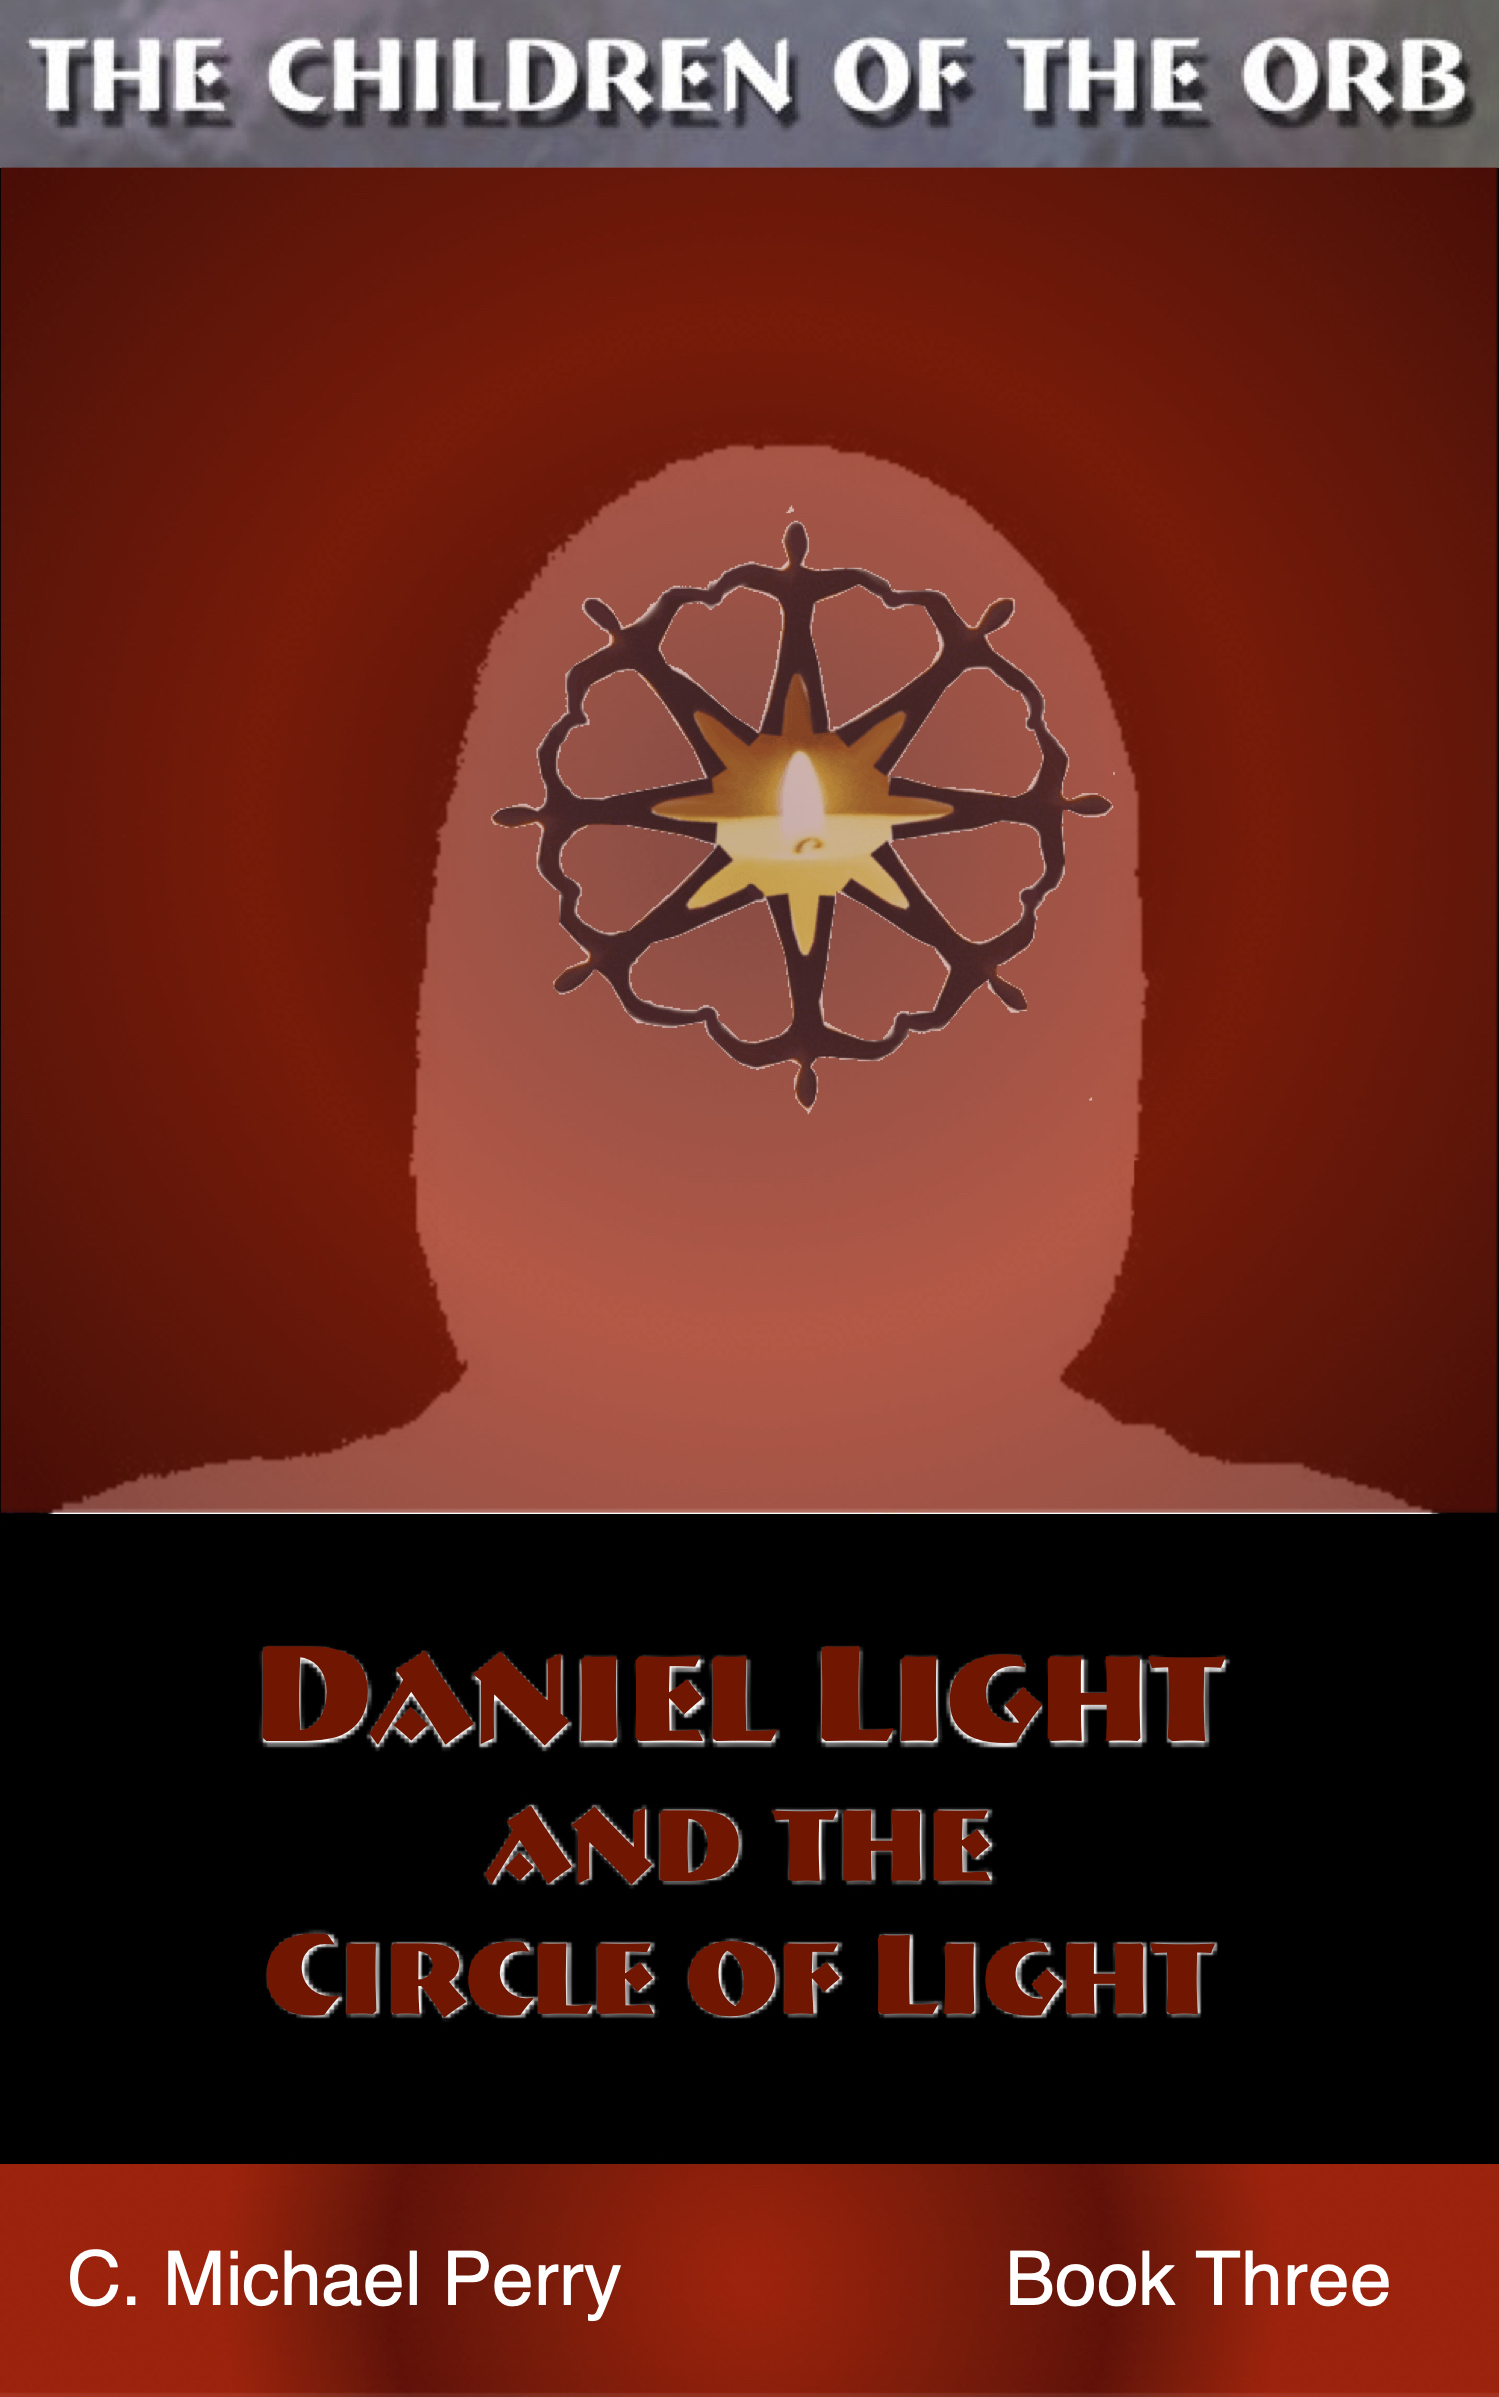 Daniel Light and the Circle of Light — Book 3